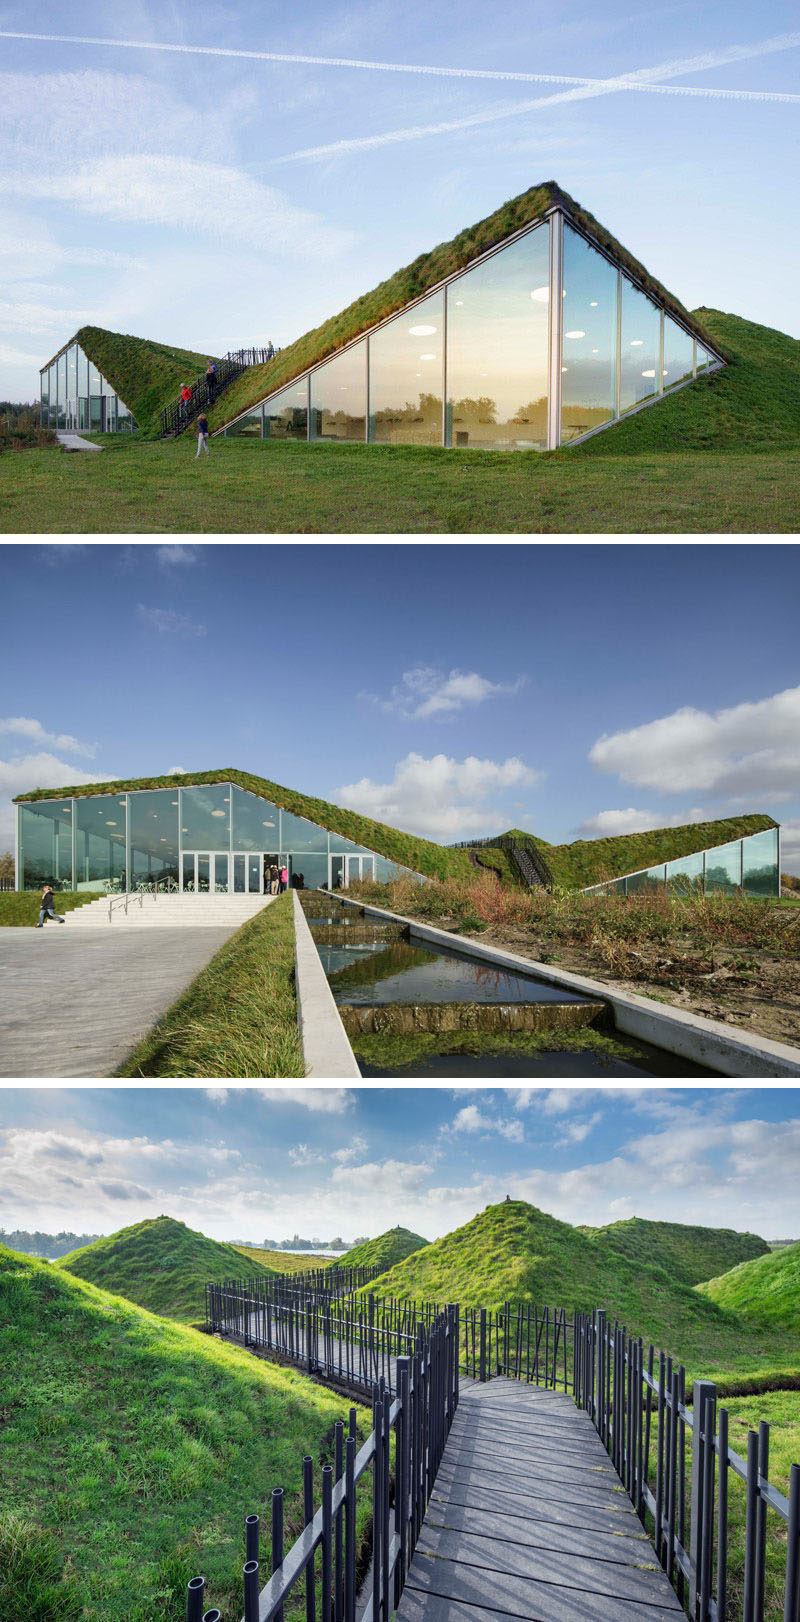 The Biesbosch Museum in Werkendam, The Netherlands, is covered in grass and features a walkway on the roof that's surrounded by small grassy mounds and leads to a look out at one end.